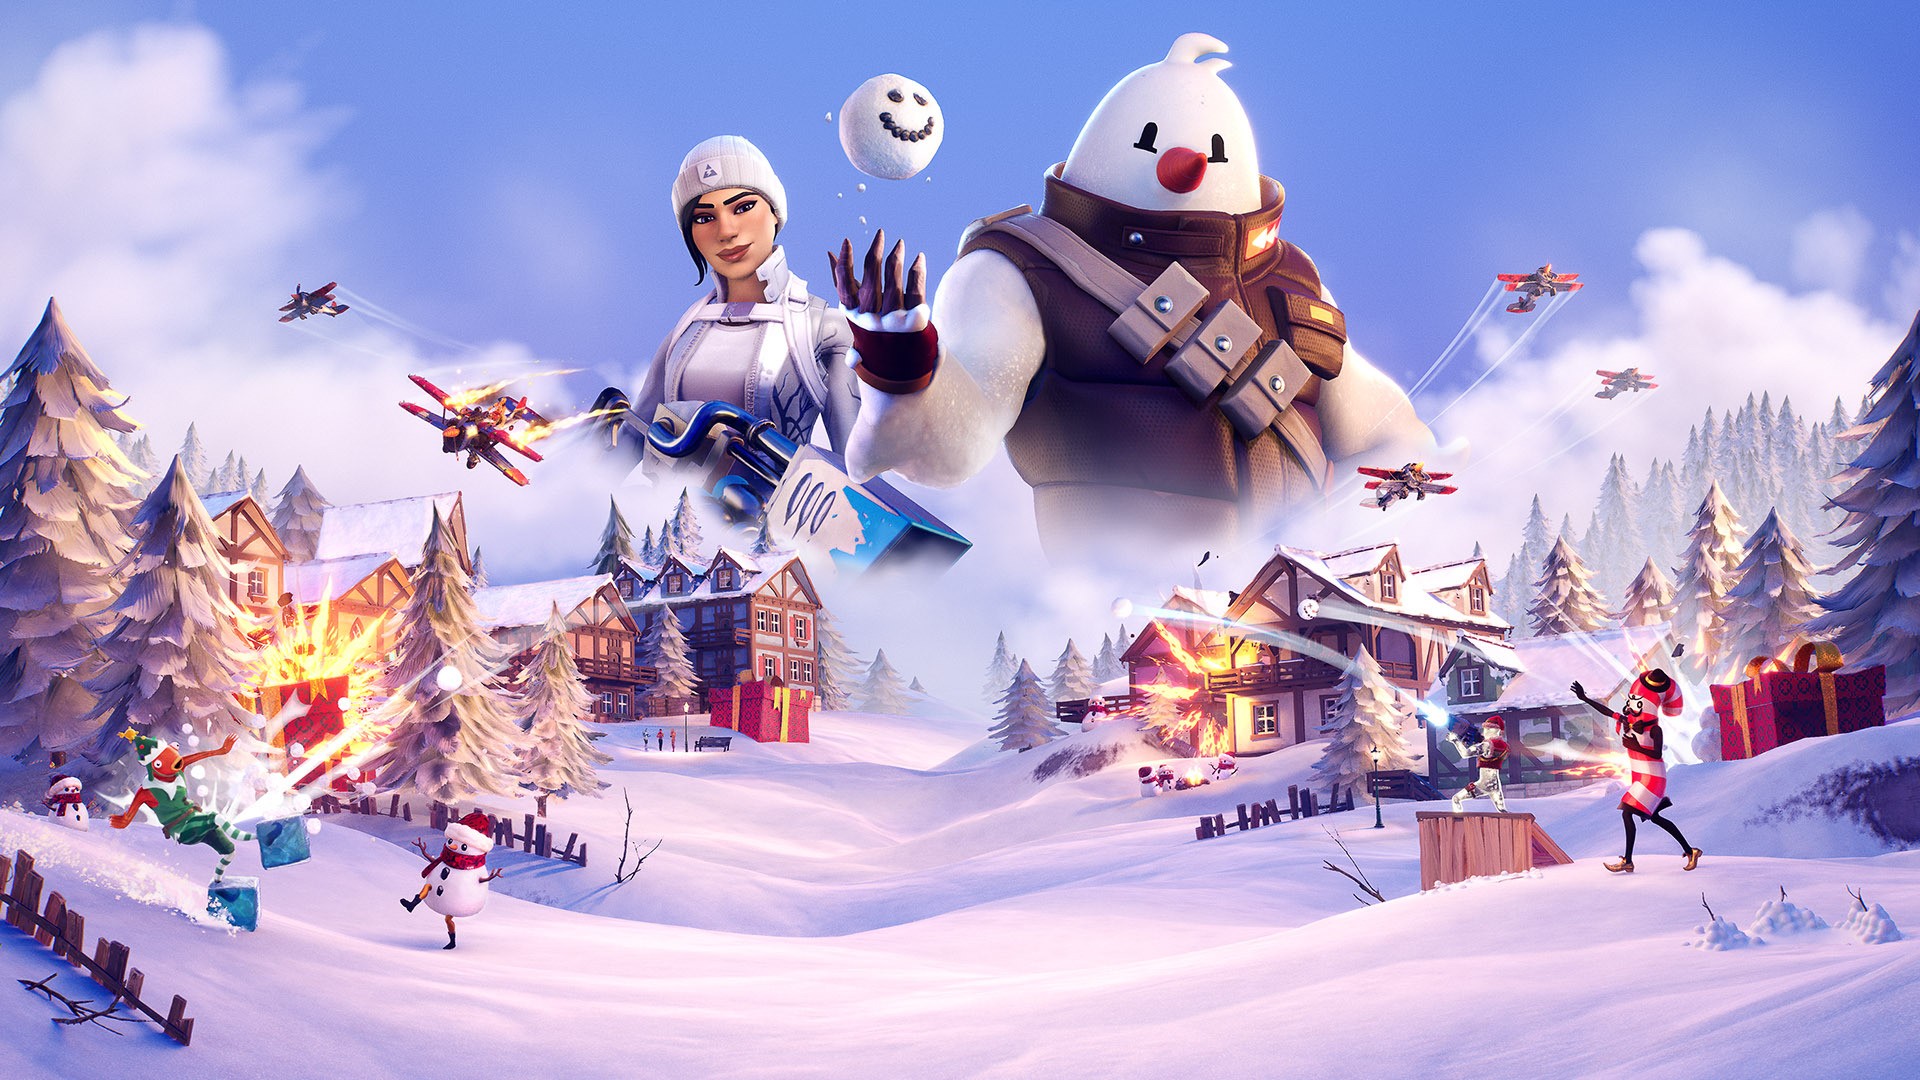  How to Easily Place Festive Snow Creatures Fortnite! Check Out